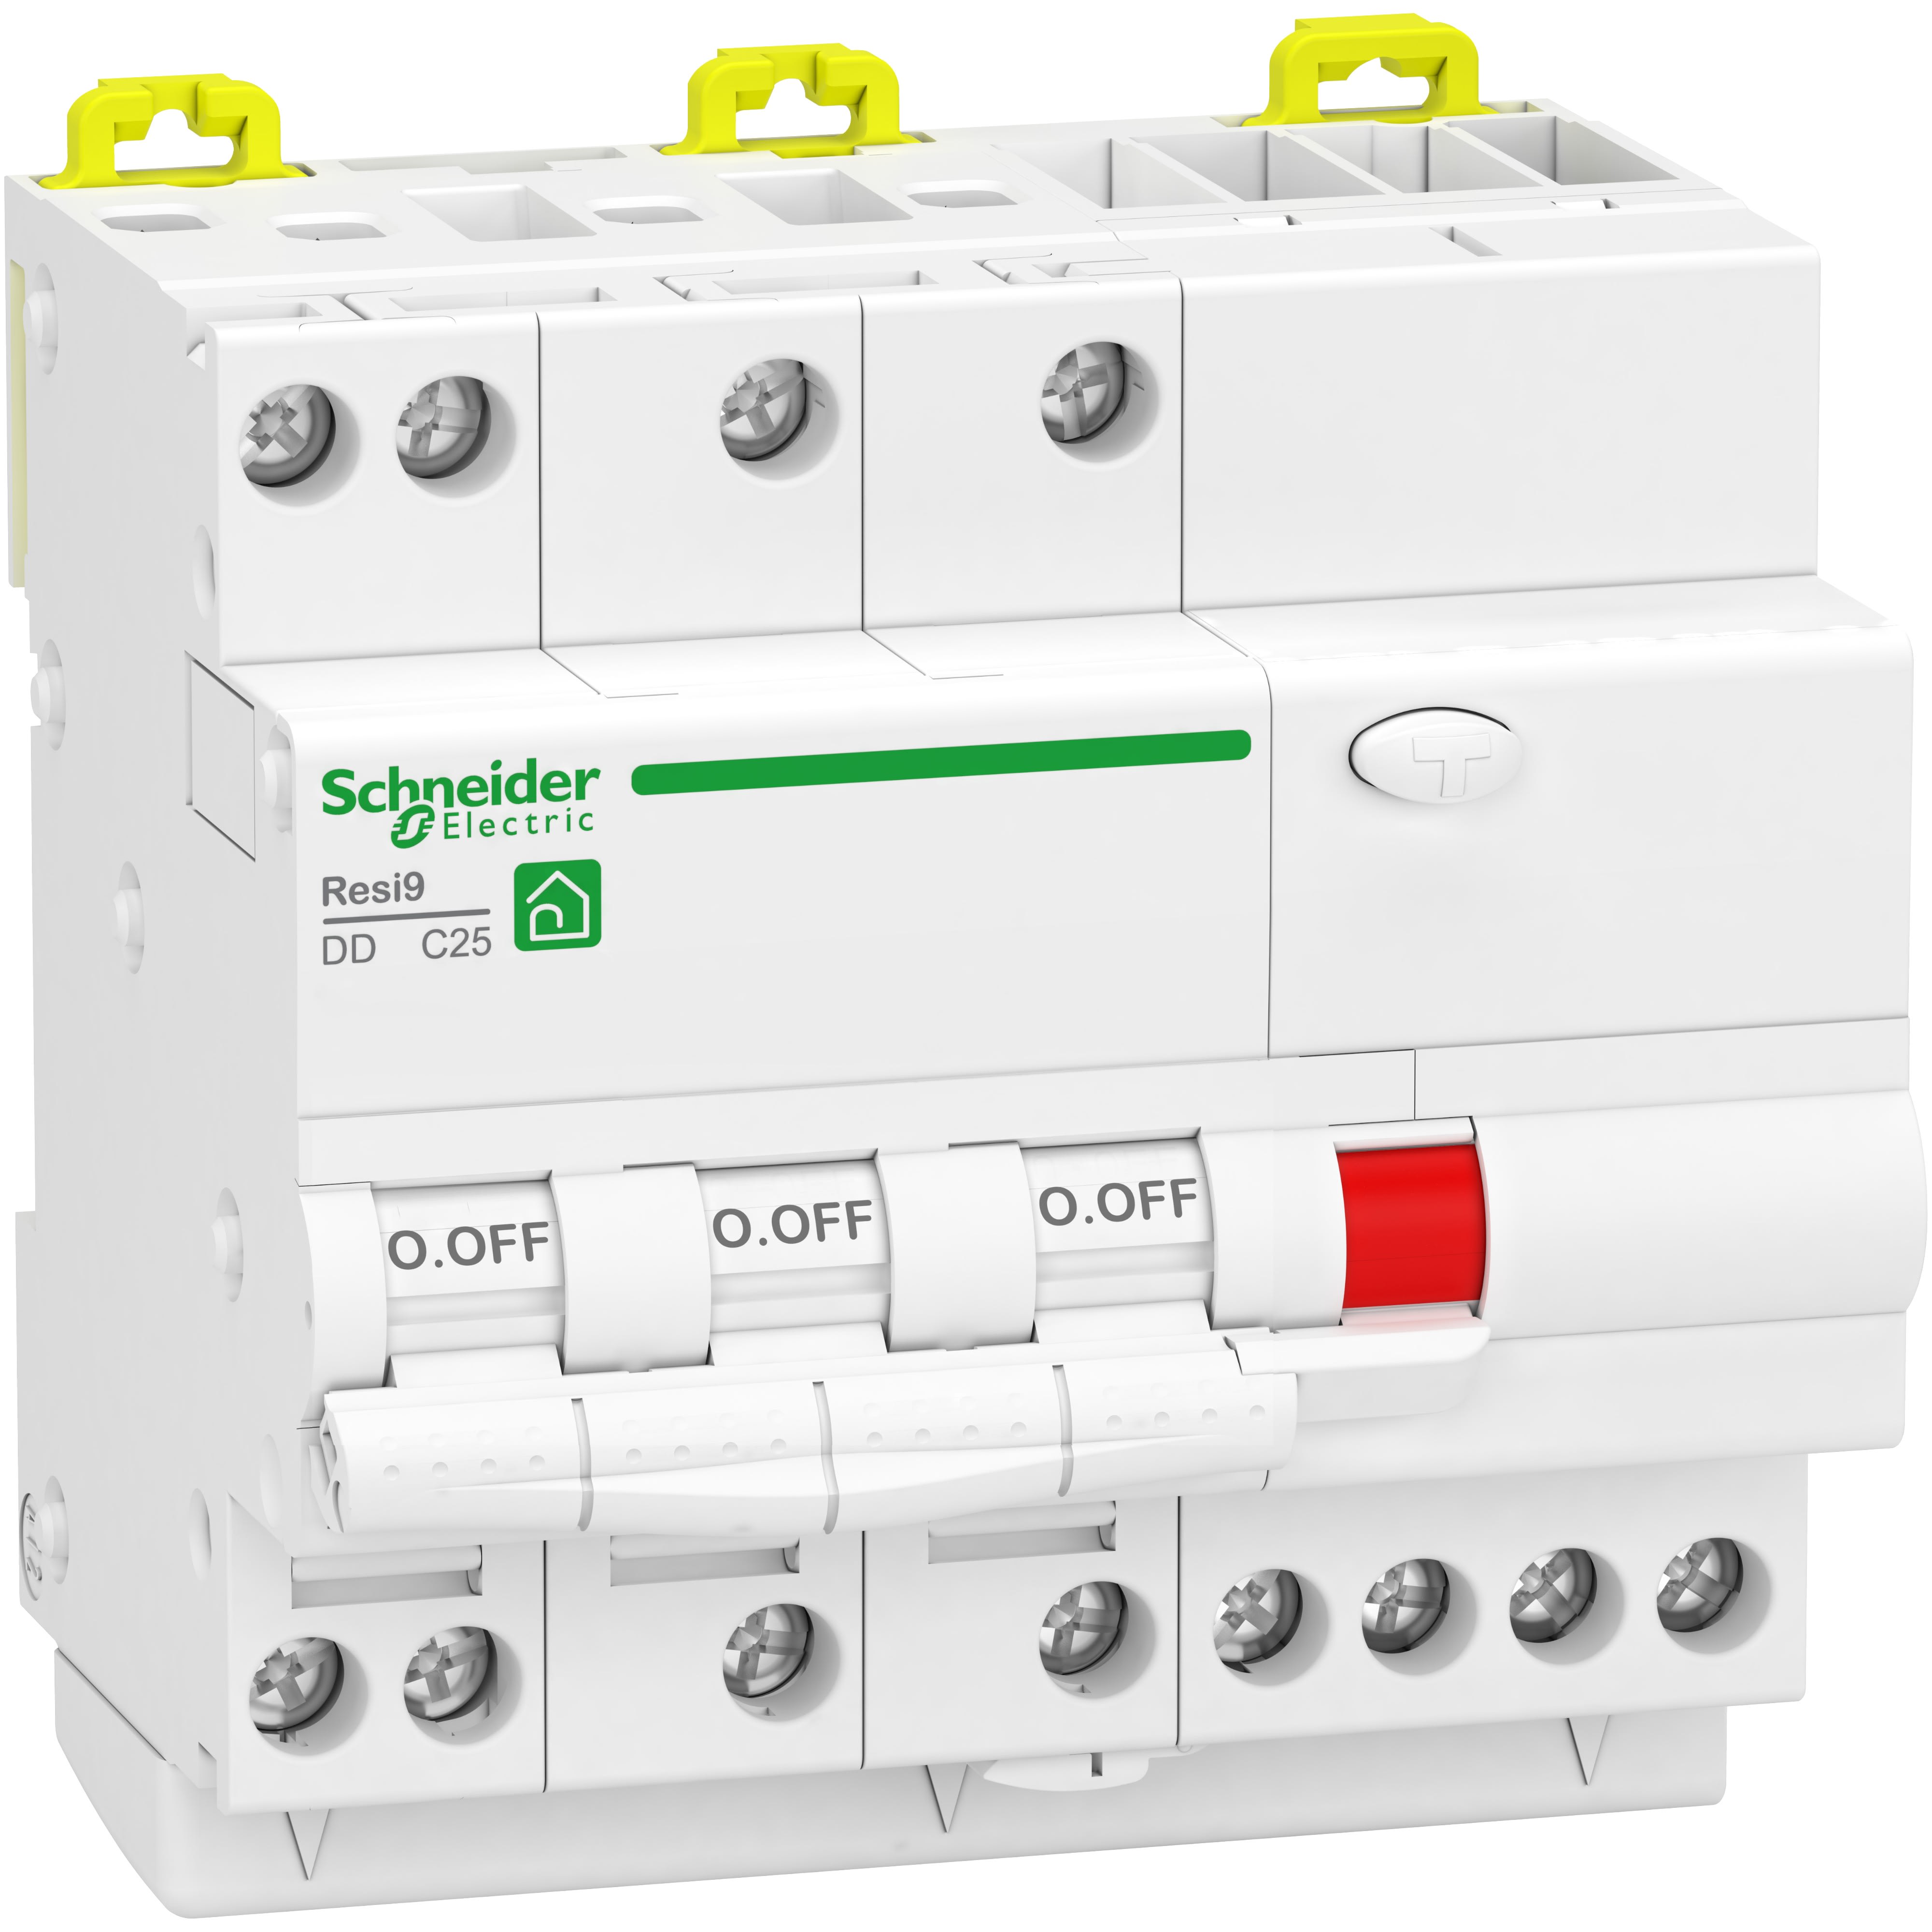 Schneider Electric - Resi9 - disjoncteur differentiel - 3P+N - 32A - 30mA - courbe C - type Asi